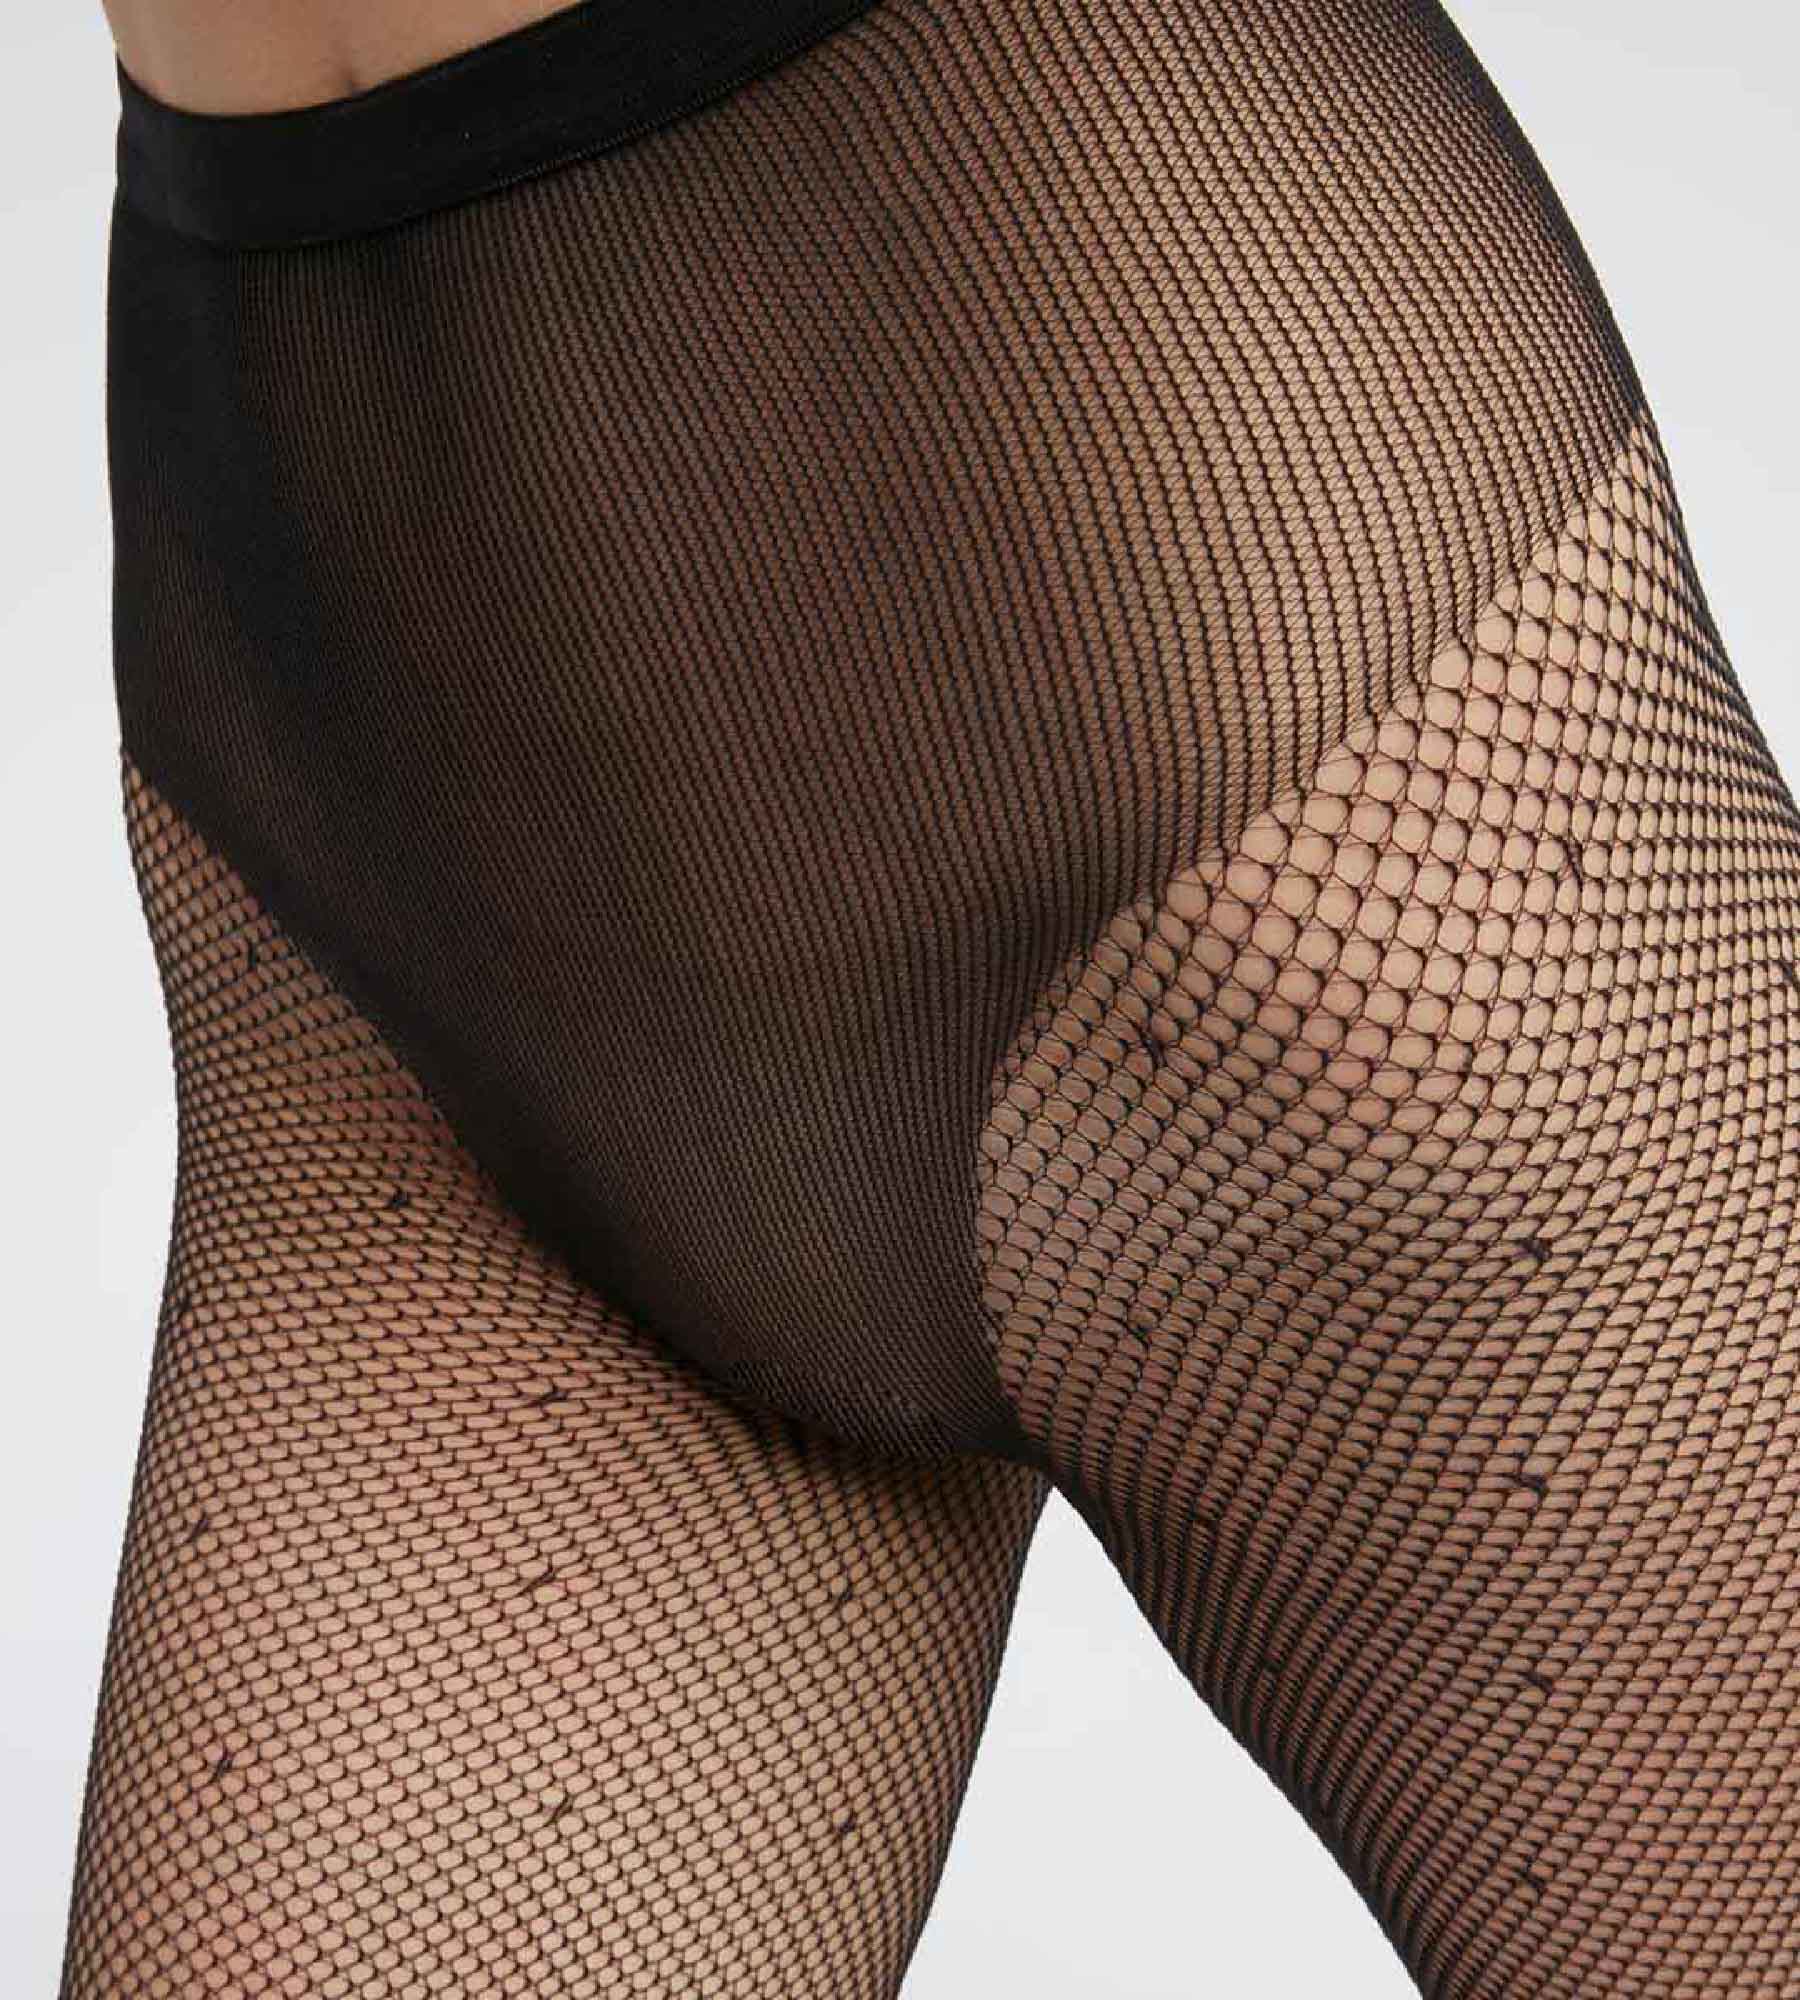 Dim Style Black Women's tights in veil and polka dots with sexy high cut